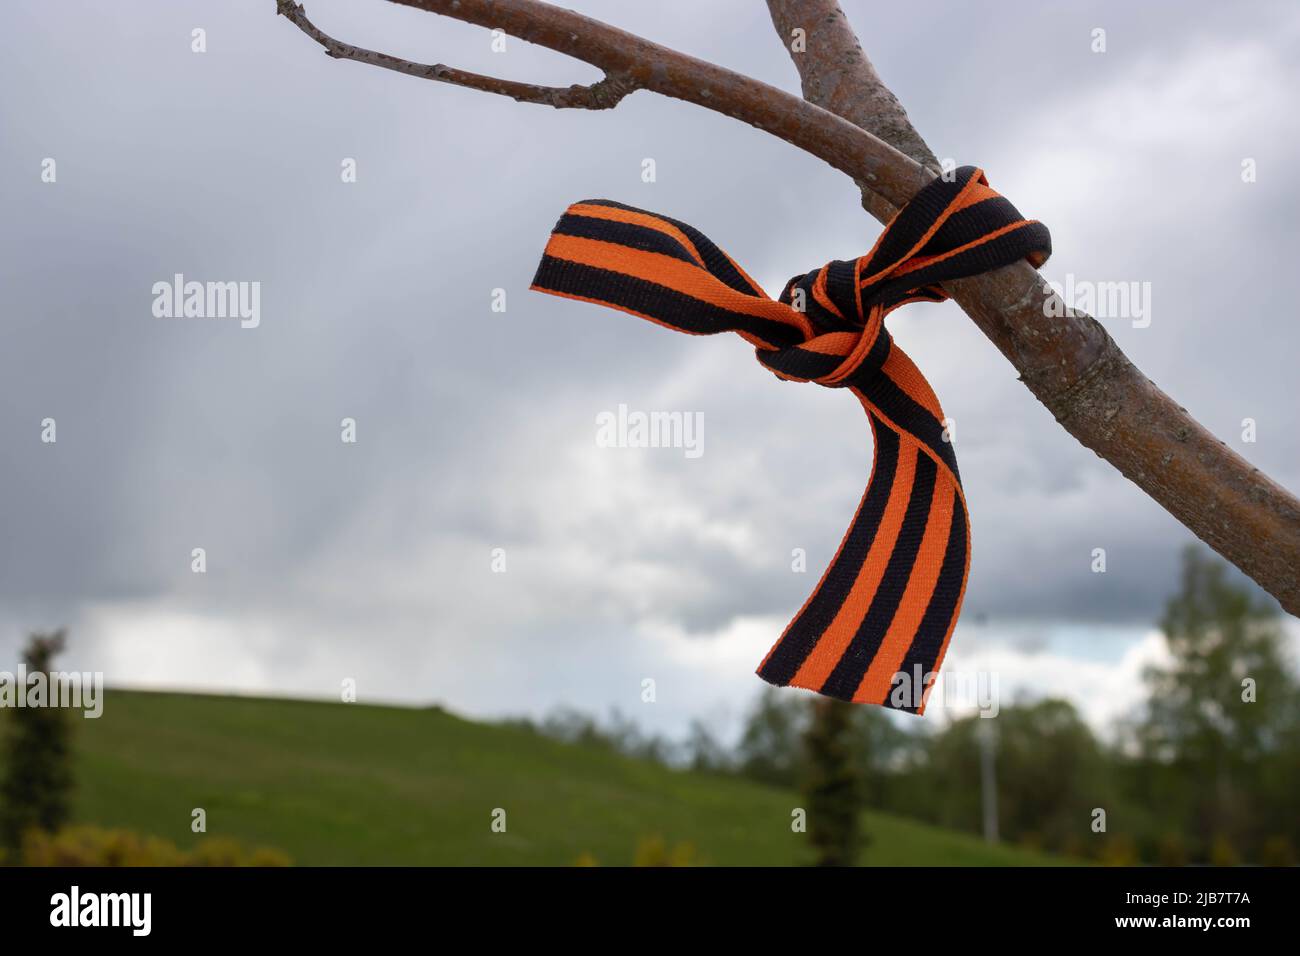 Saint George's Ribbons on tree branches, May 9, russian holiday victory day. Stock Photo